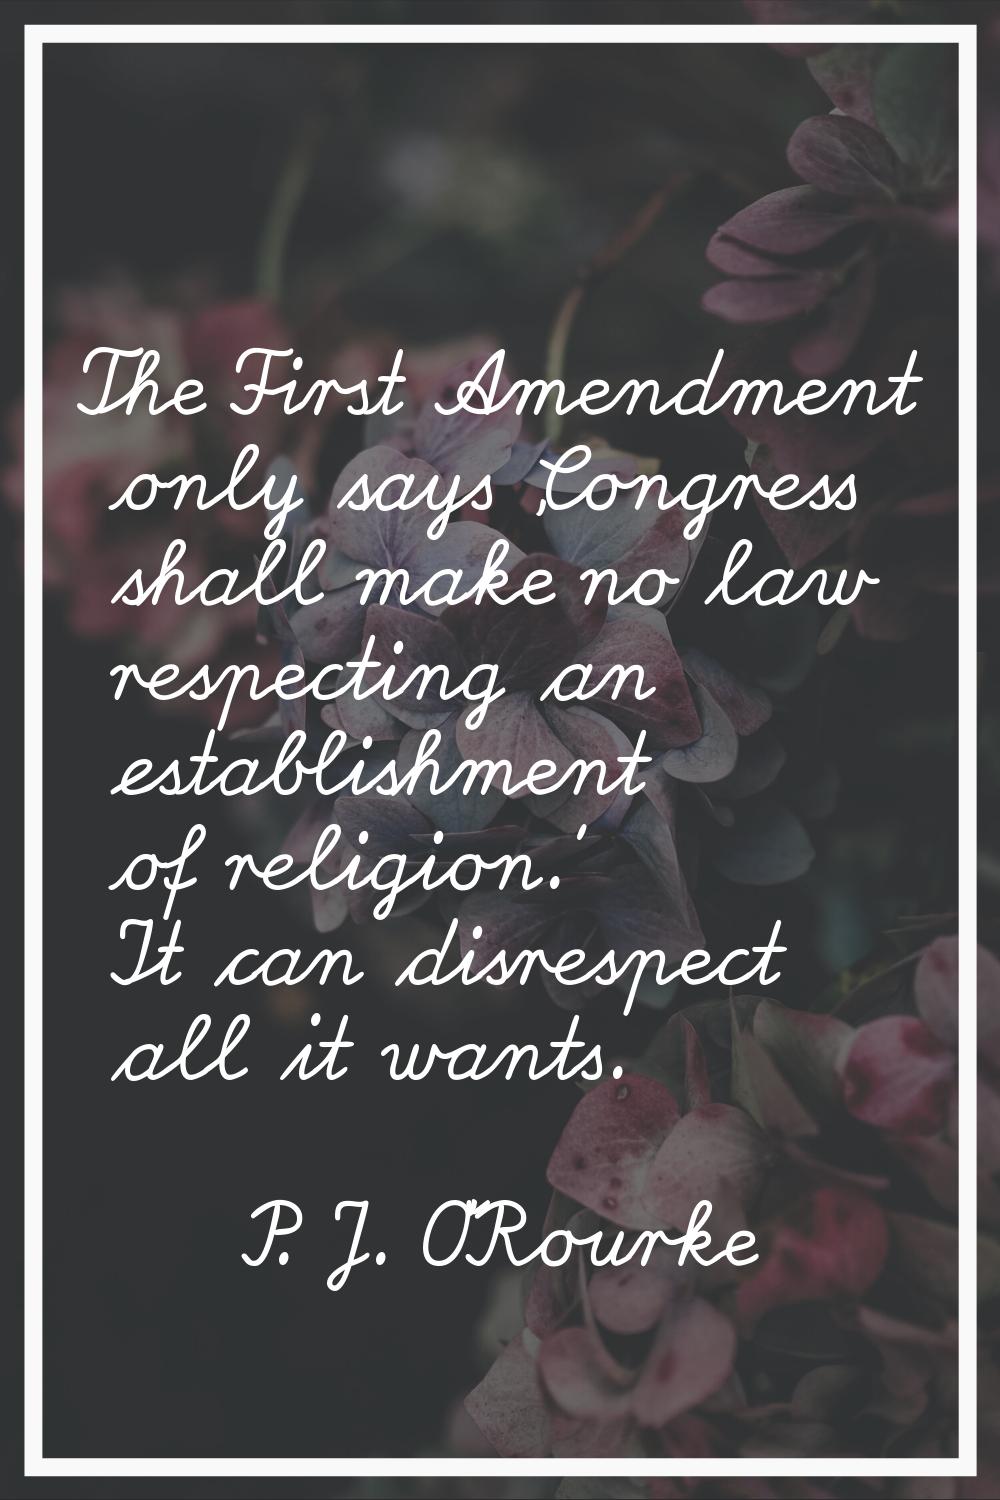 The First Amendment only says 'Congress shall make no law respecting an establishment of religion.'